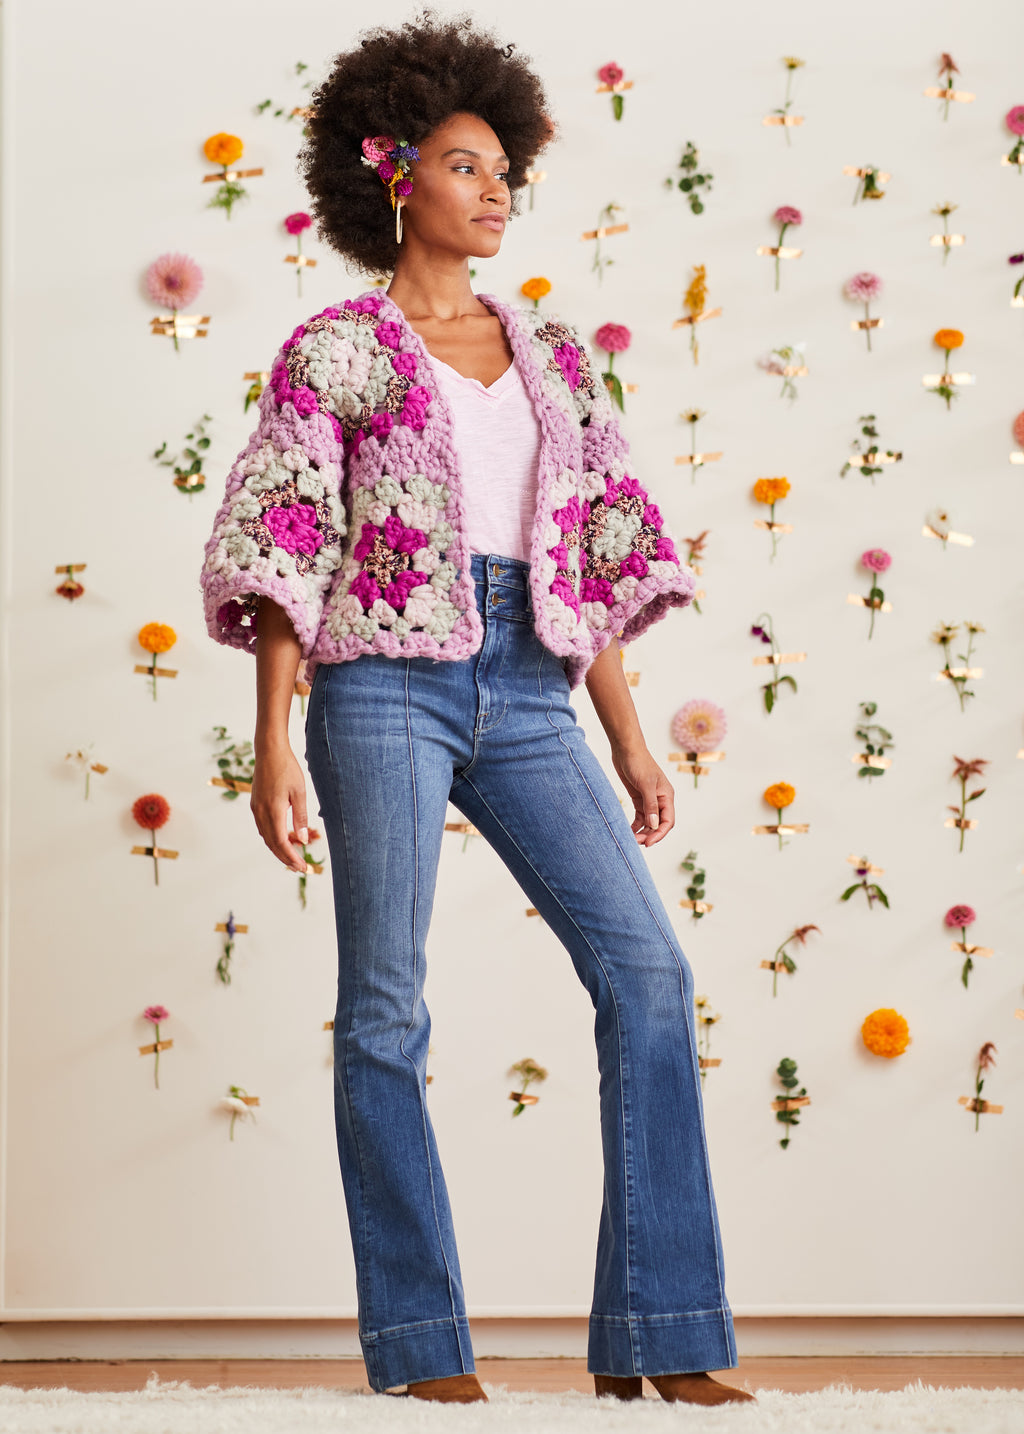 Model posing in front of flower wall wearing lavender and orchid crochet granny square cardi over a V-neck t-shirt with denim jeans and heeled boots